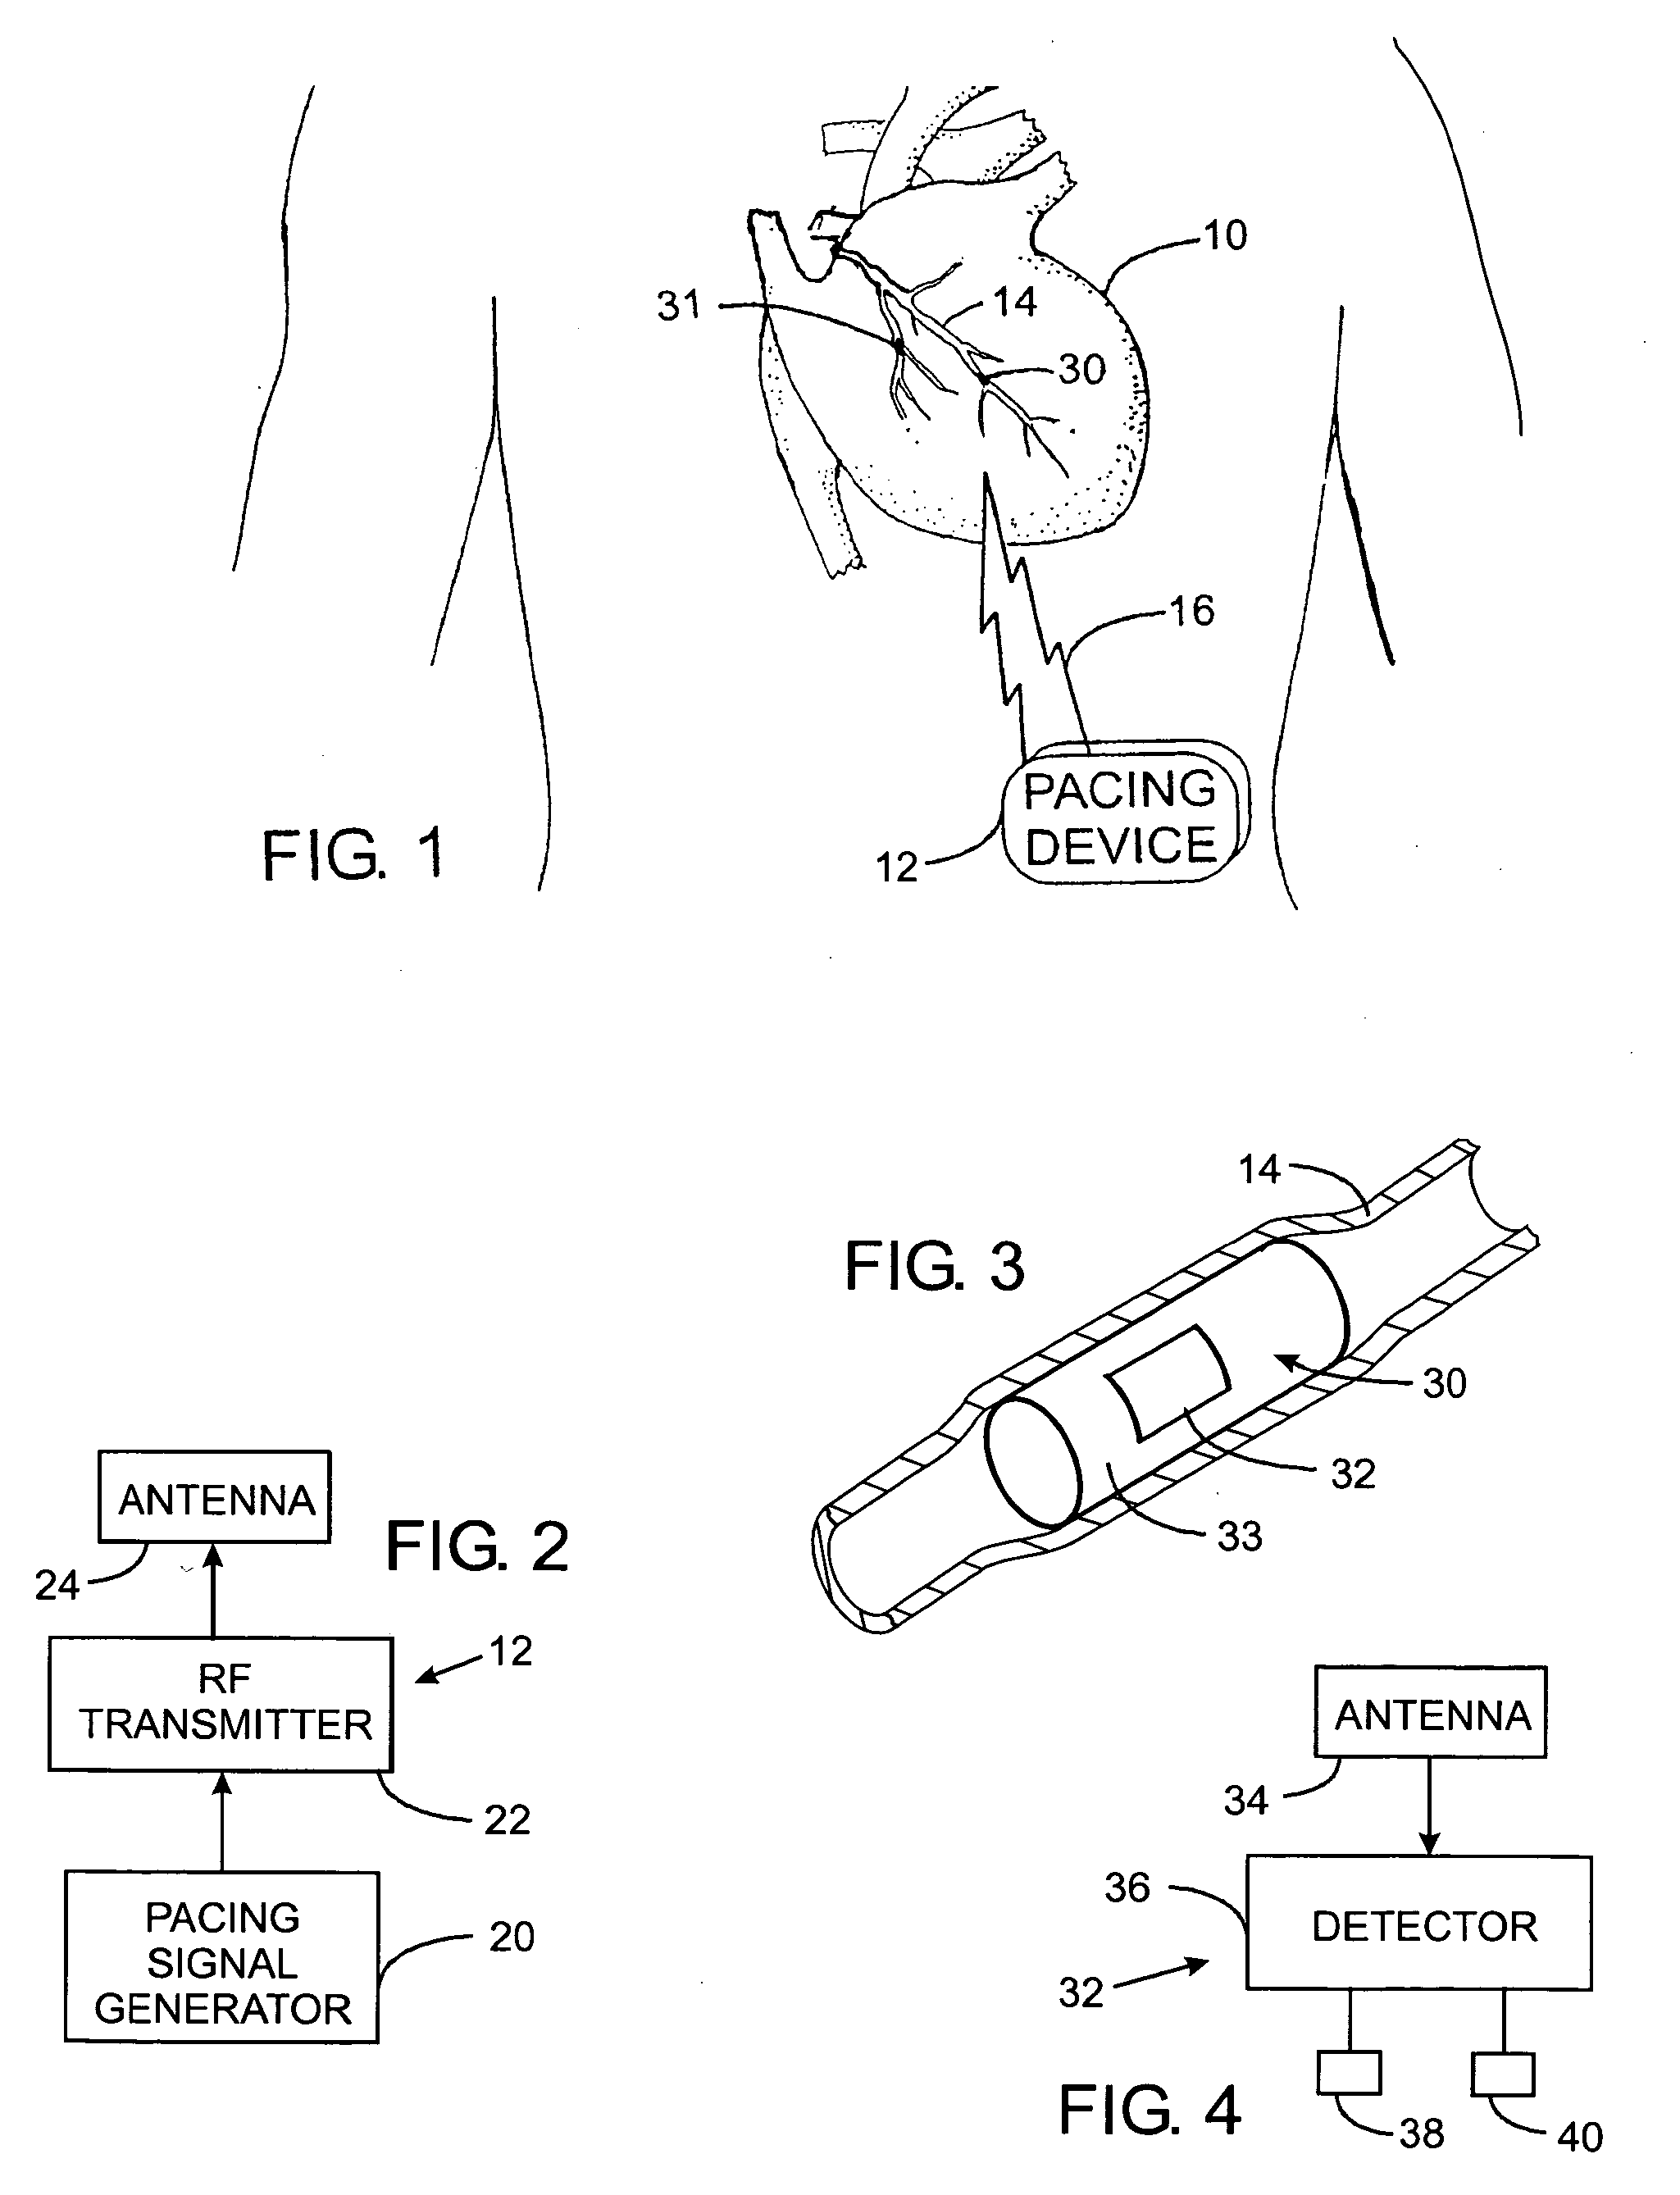 Vagal nerve stimulation using vascular implanted devices for treatment of atrial fibrillation